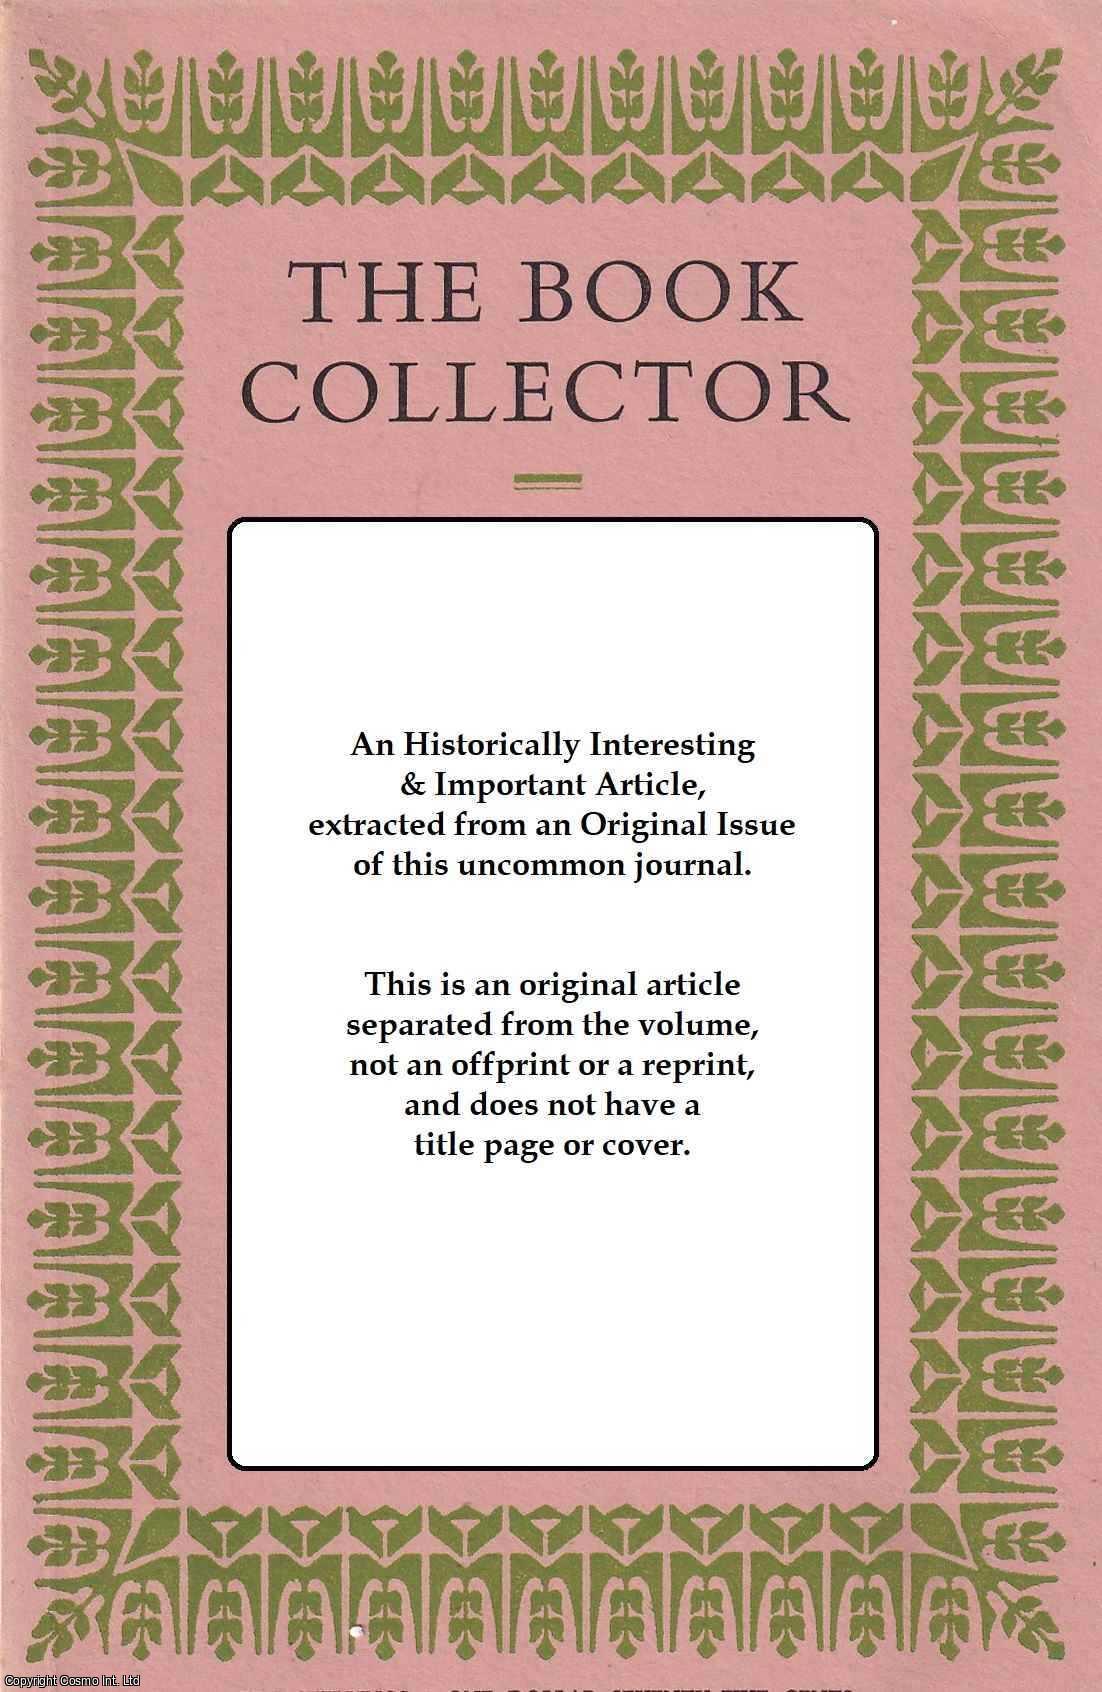 Eugene D. LeMire - William Morris in America: A Publishing History from Archives. This is an original article separated from an issue of The Book Collector Journal.